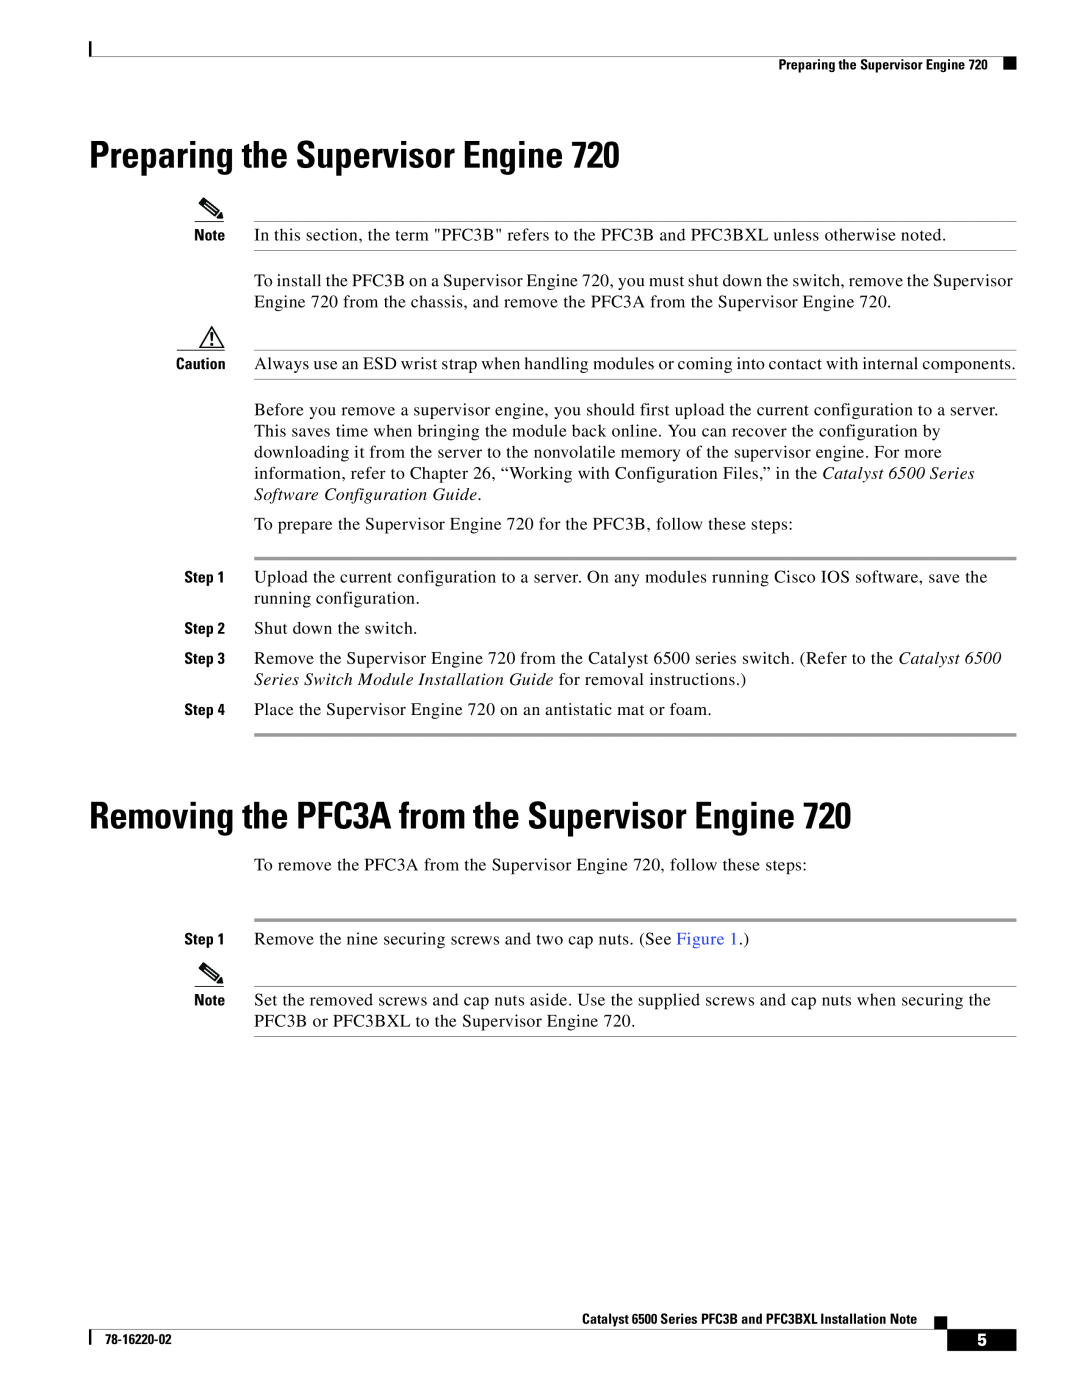 Cisco Systems WS-F6K-PFC3B= manual Preparing the Supervisor Engine, Removing the PFC3A from the Supervisor Engine 